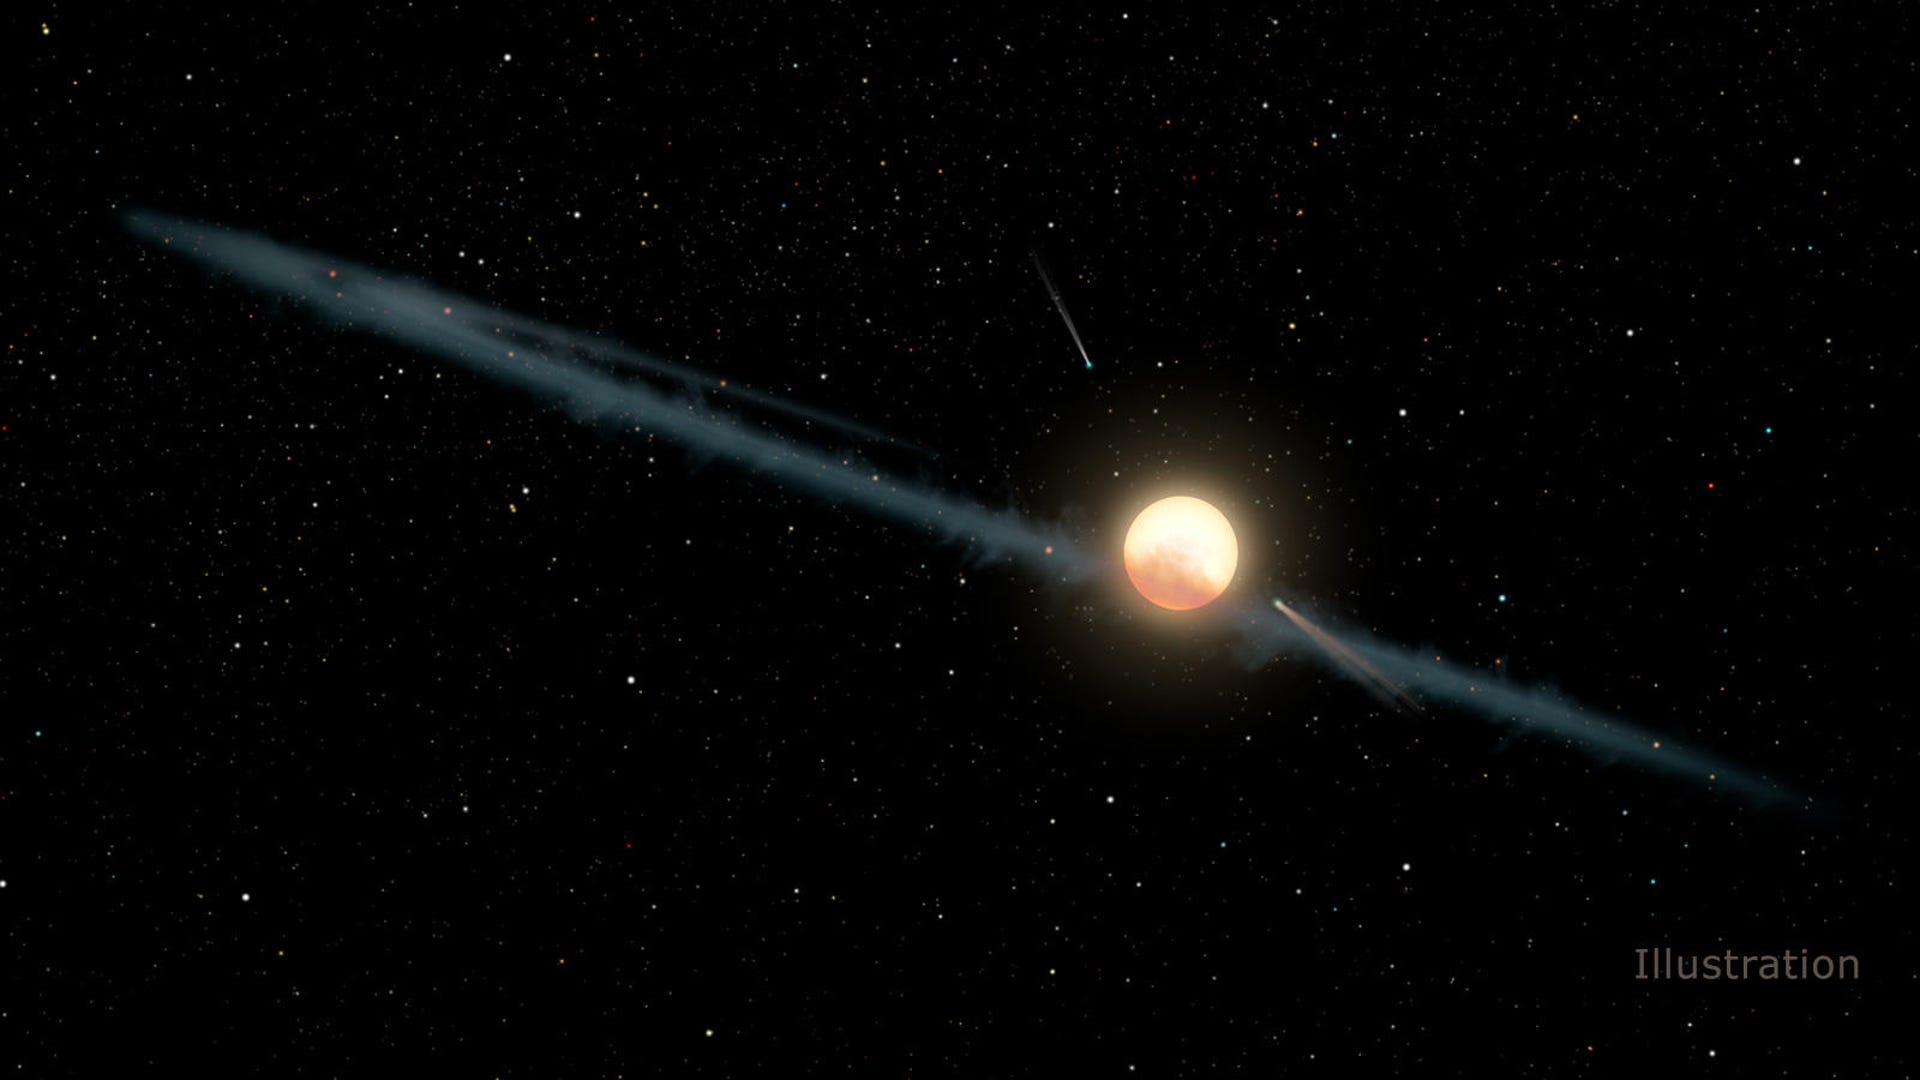 This illustration shows an artist's vision of what Tabby's Star might look like with a surrounding ring of dust.